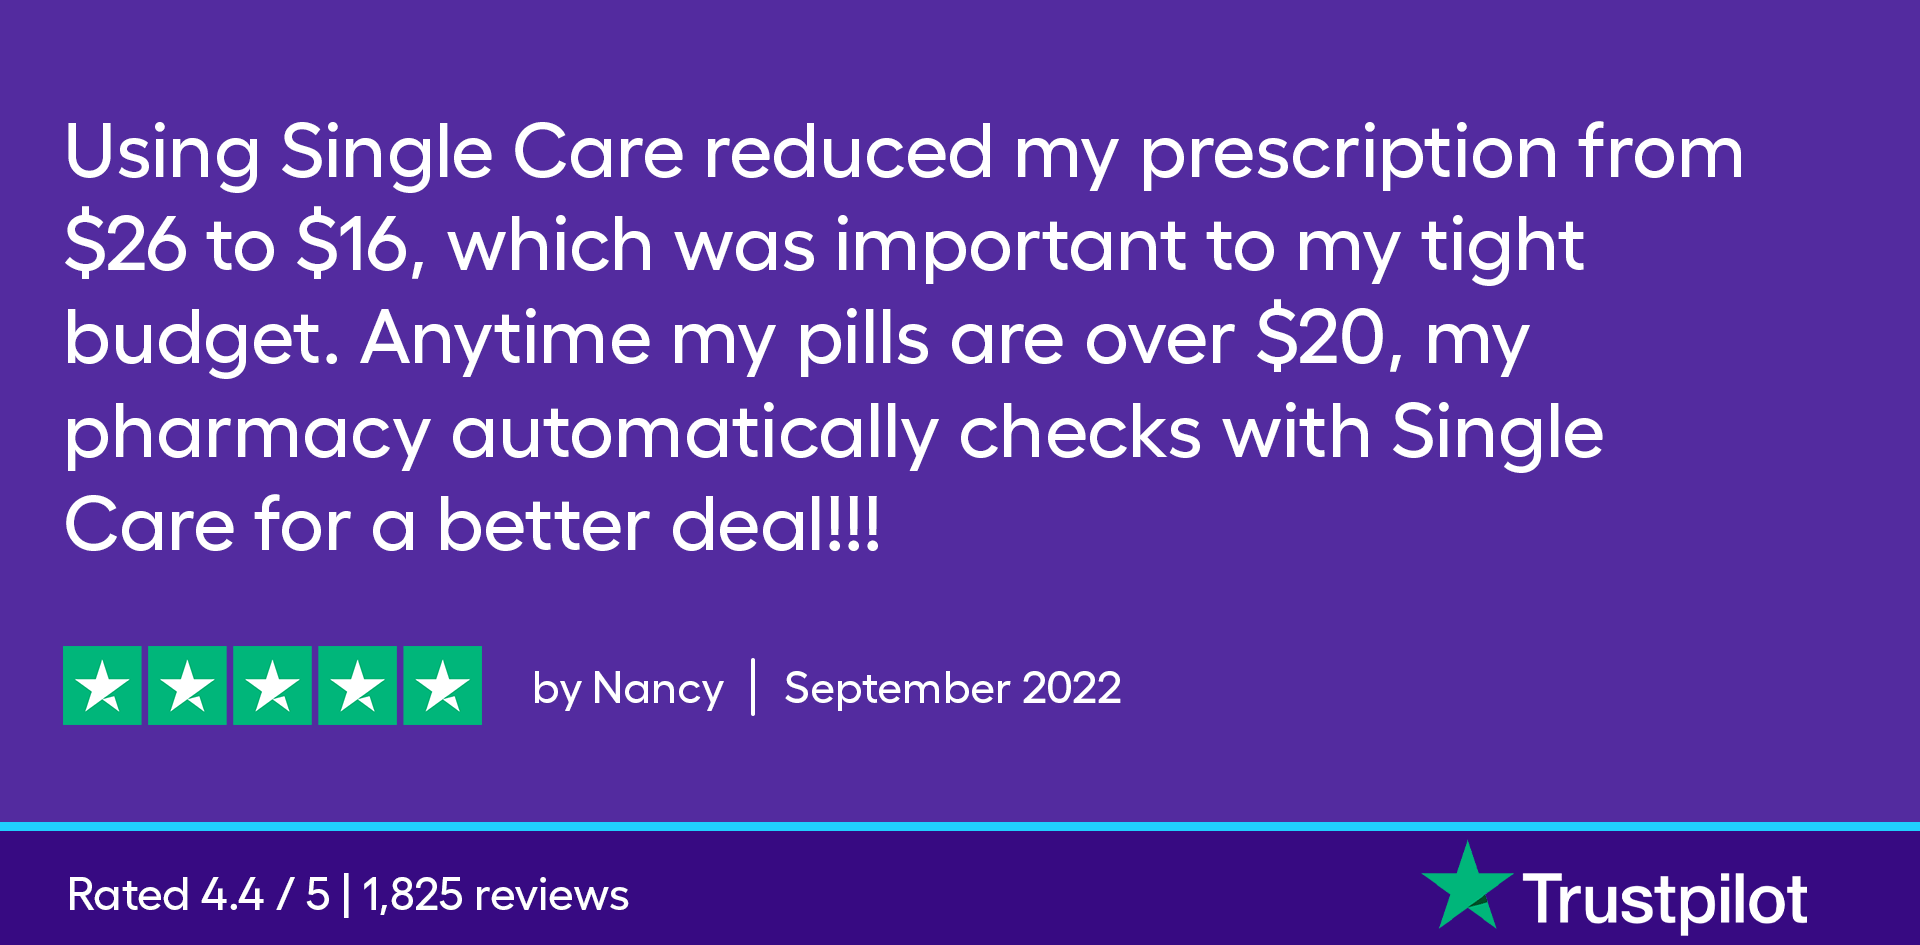 Using SingleCare reduced my prescription from $26 to $16, which was important to my tight budget. Anytime my pills are over $20, my pharmacy automatically checks with SingleCare for a better deal!